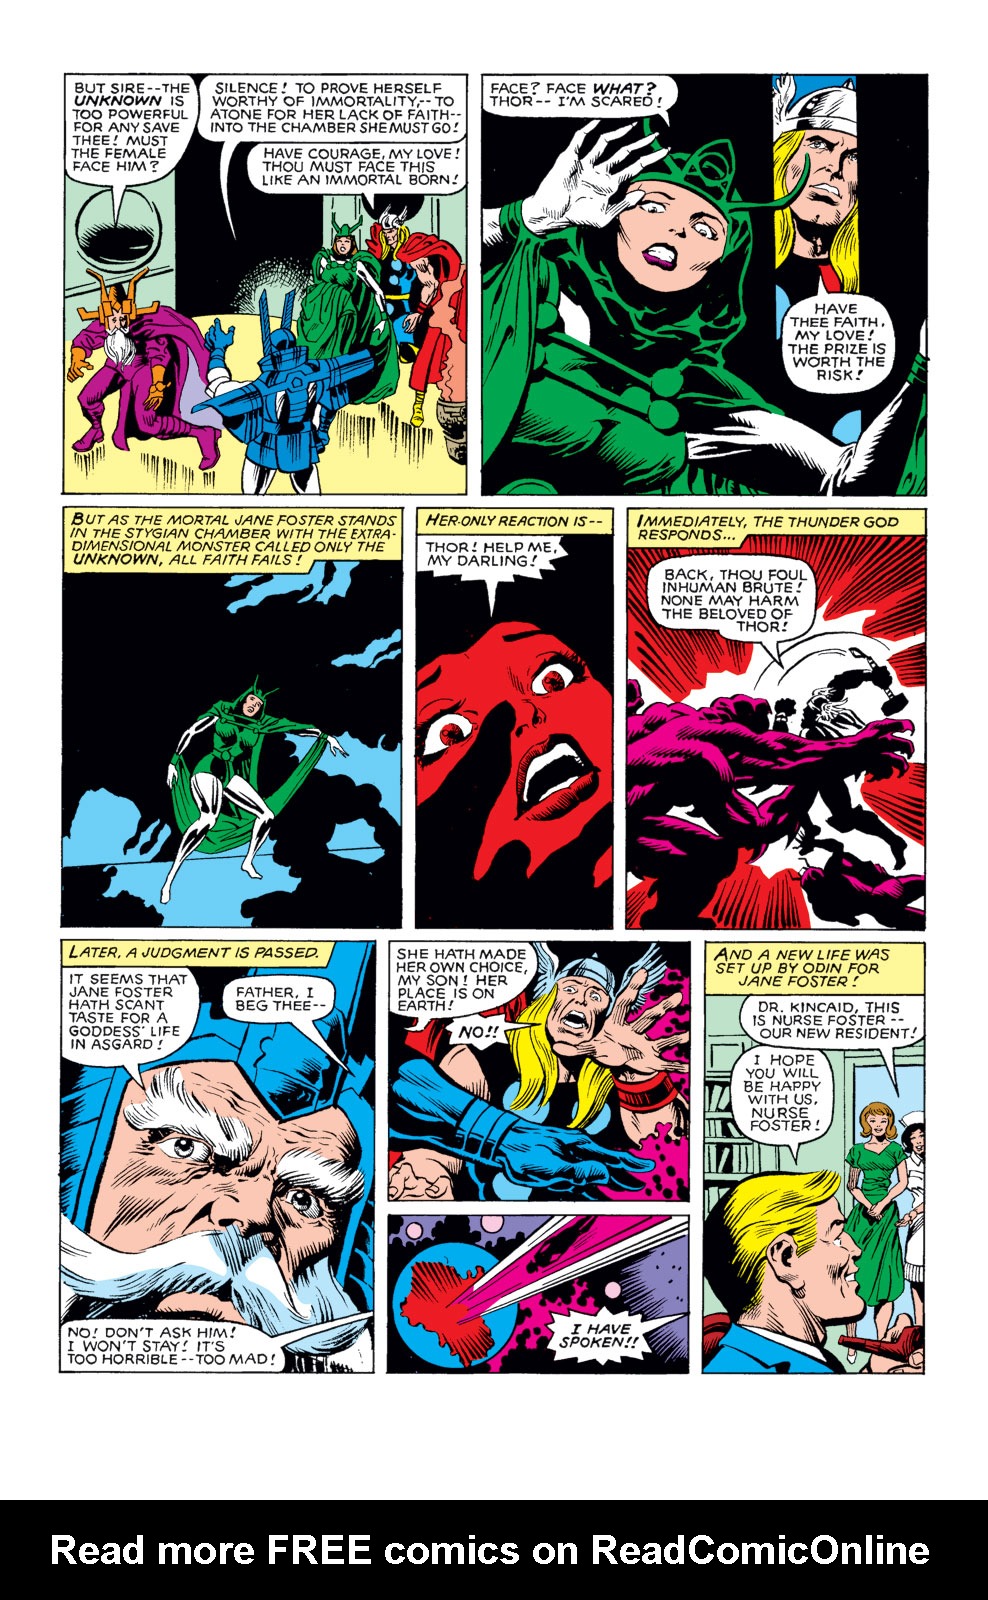 What If? (1977) issue 25 - Thor and the Avengers battled the gods - Page 4